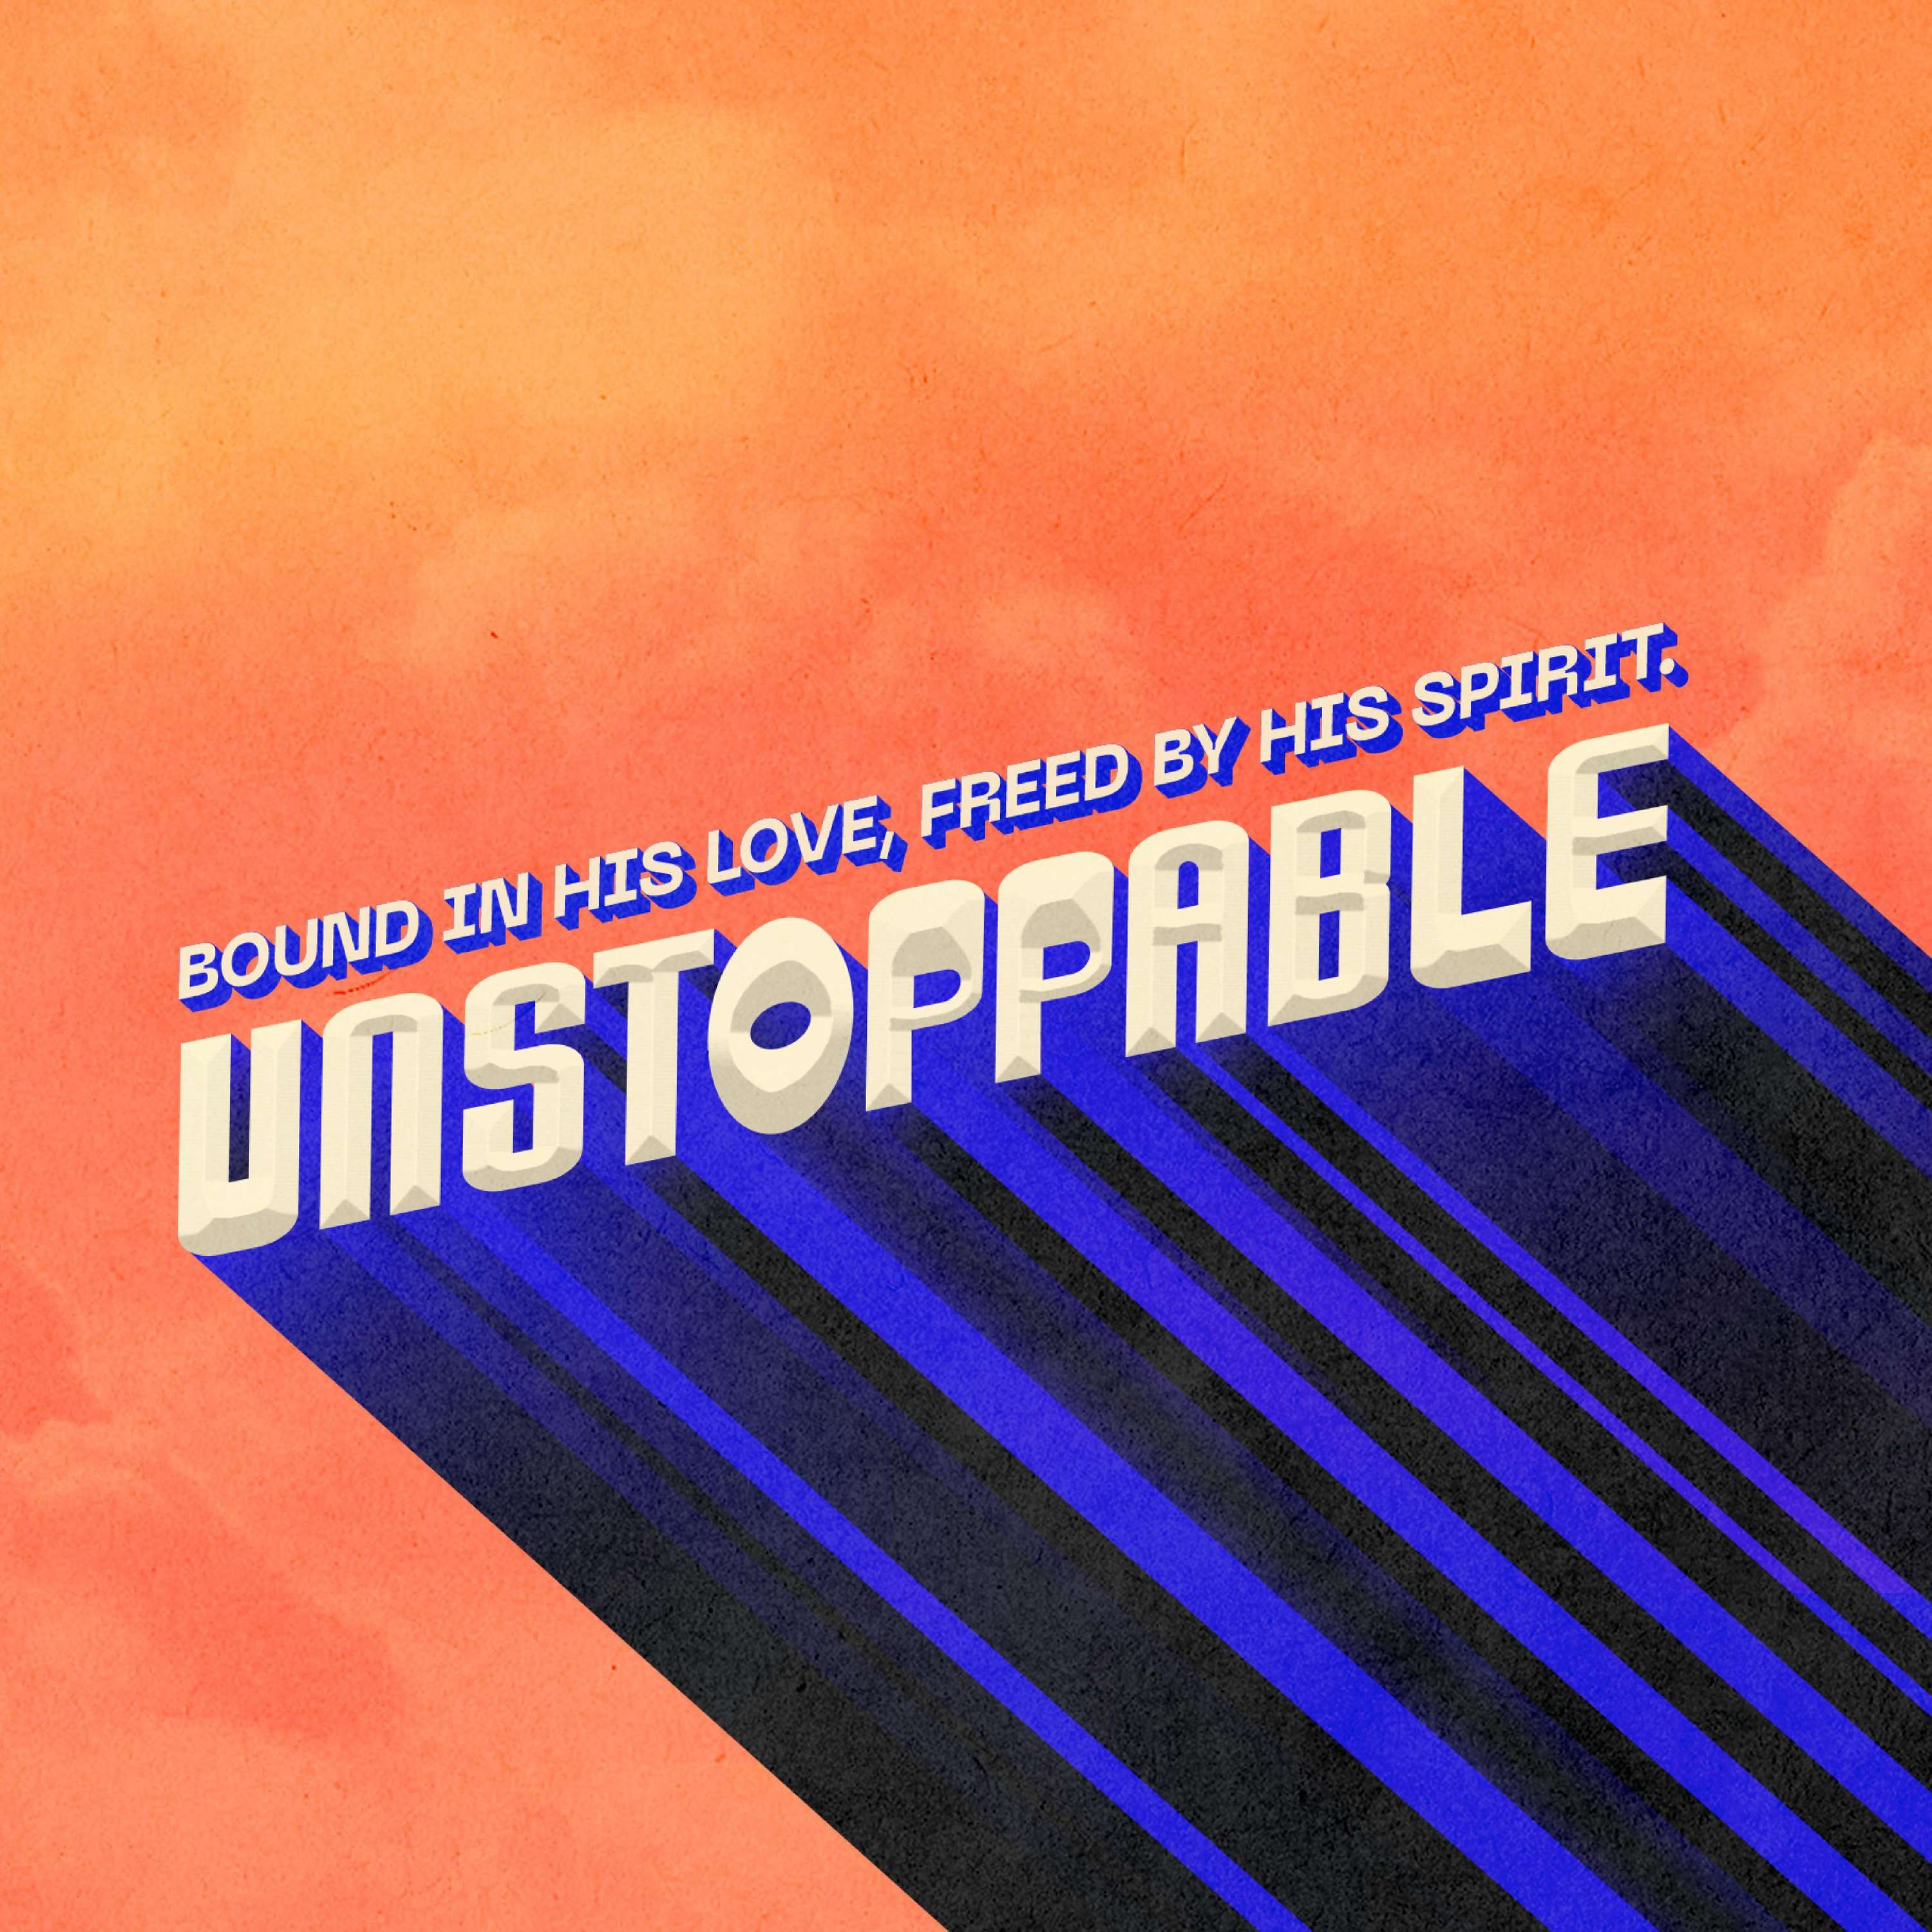 Unstoppable: Bound In His Love, Freed By His Spirit - Part 5: The Triumph of God's Love - Woodside Bible Church